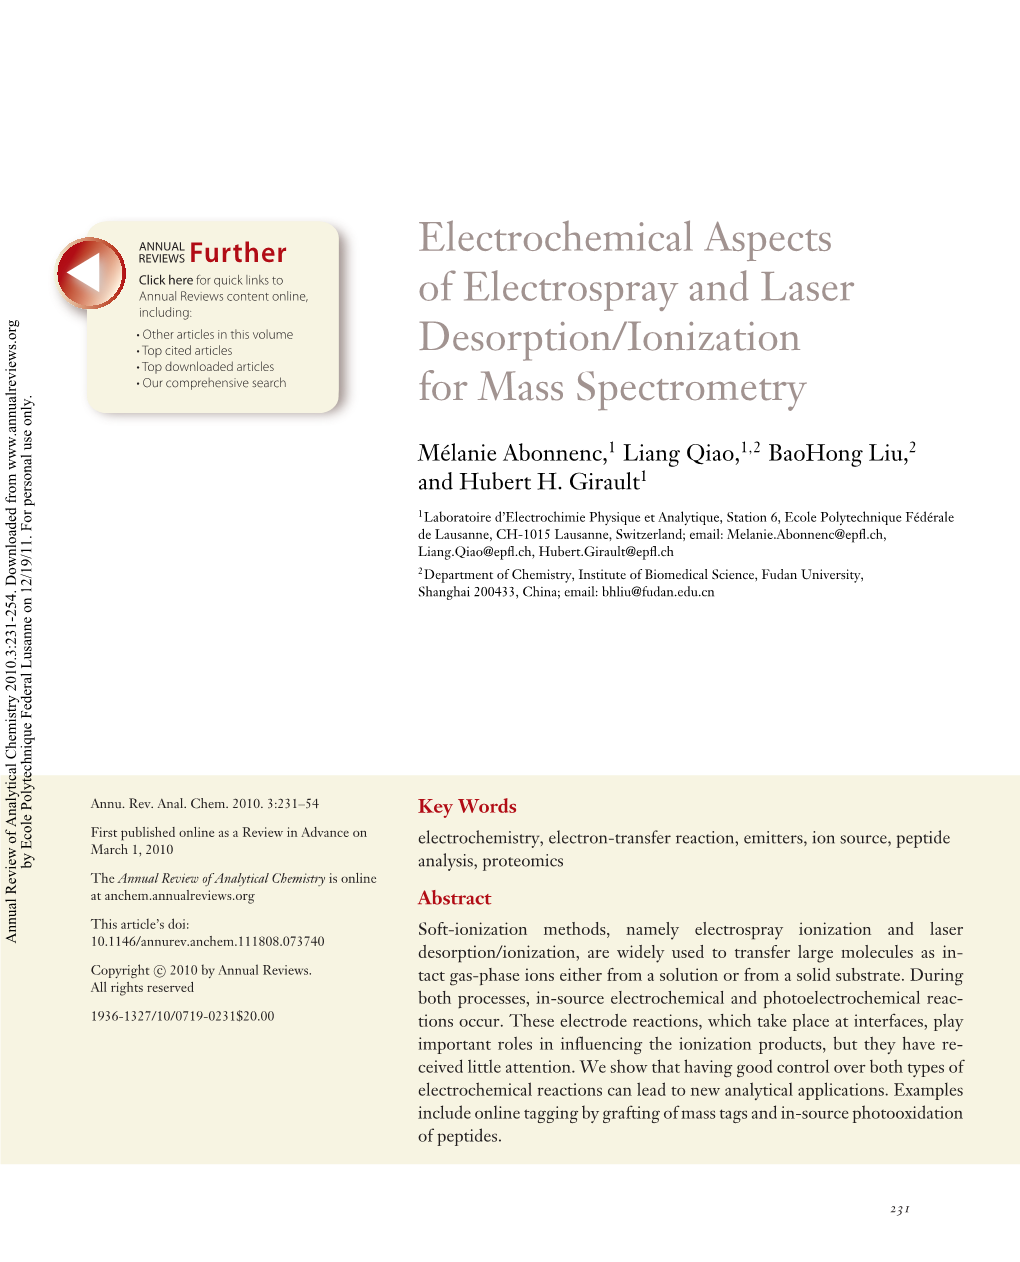 Electrochemical Aspects of Electrospray and Laser Desorption/Ionization for Mass Spectrometry